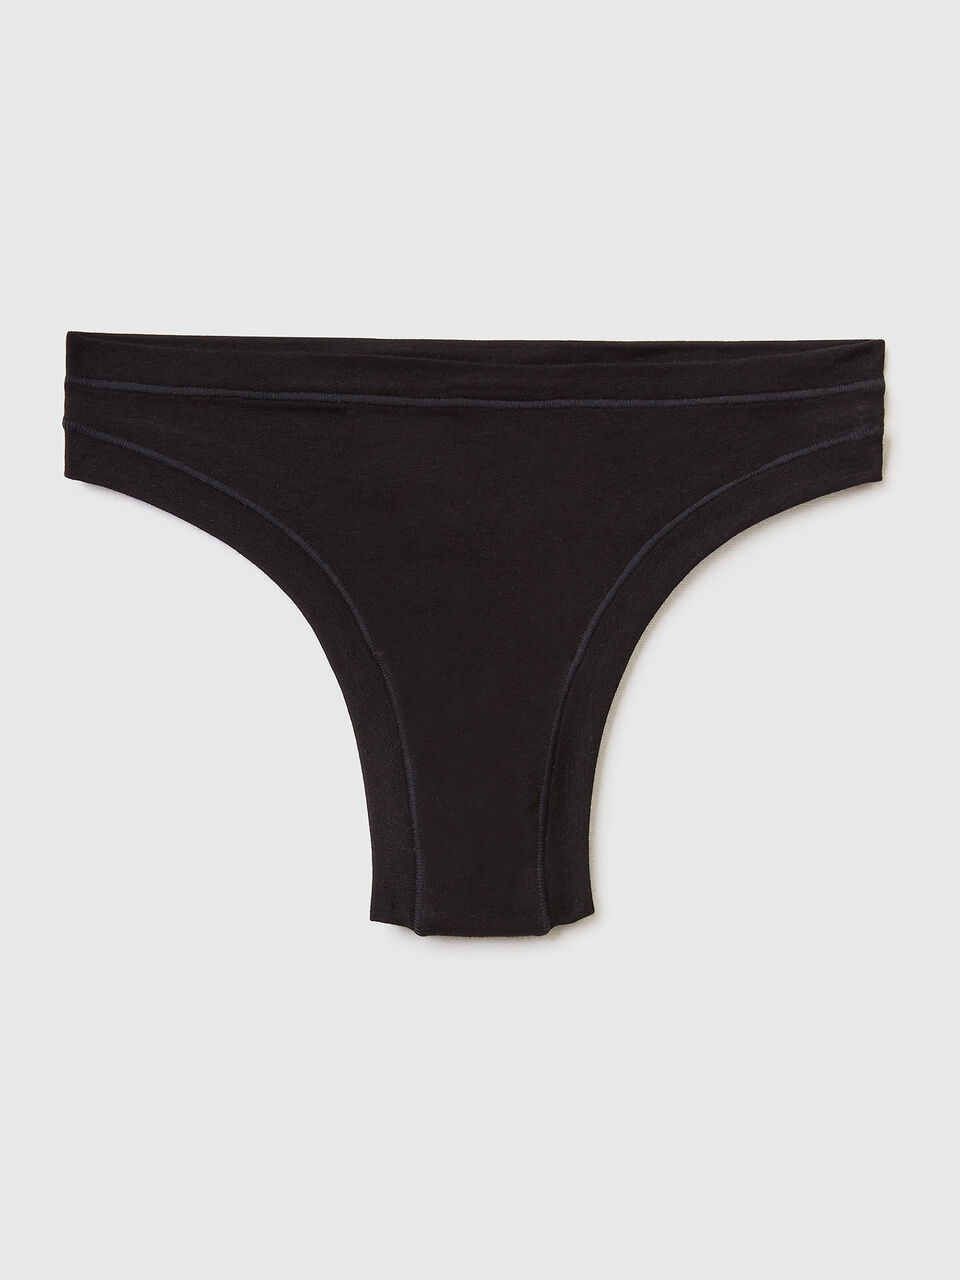 ULTRA Thong, Jersey Thong in Black Beans Color